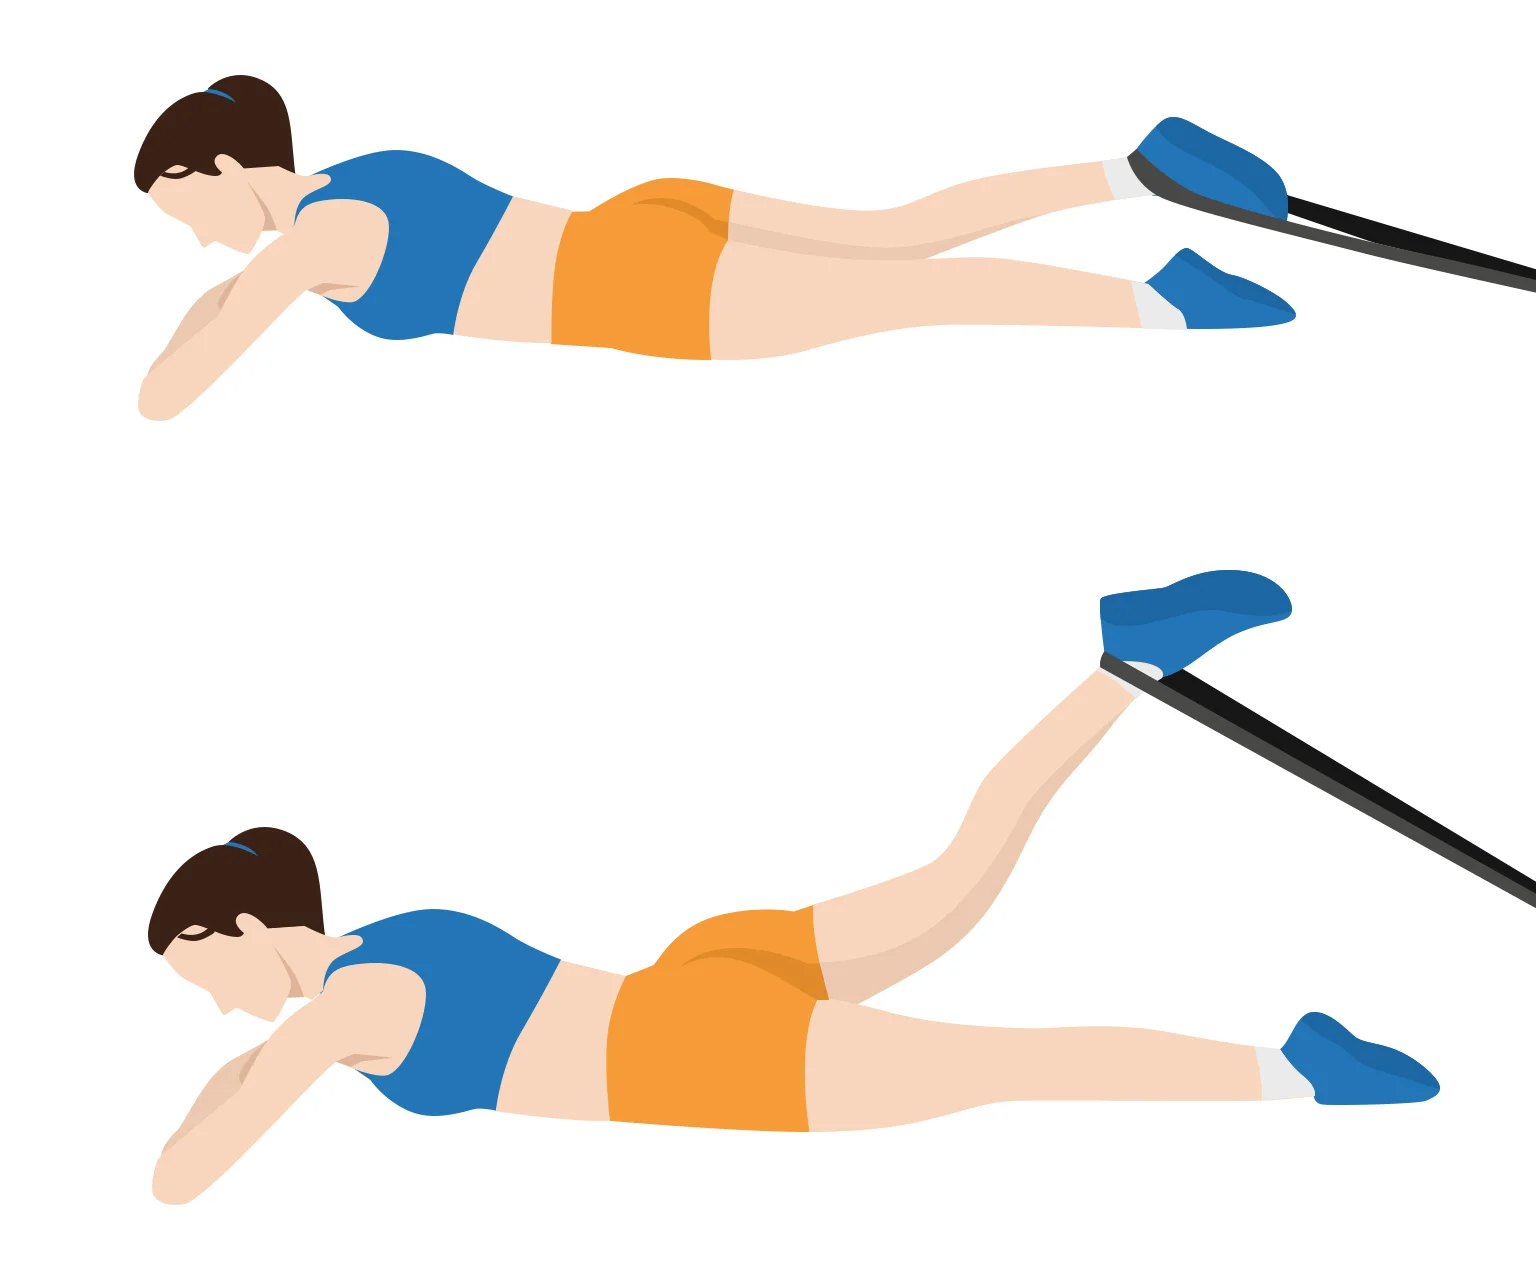 Illustration - How to do a resistance band prone leg curl